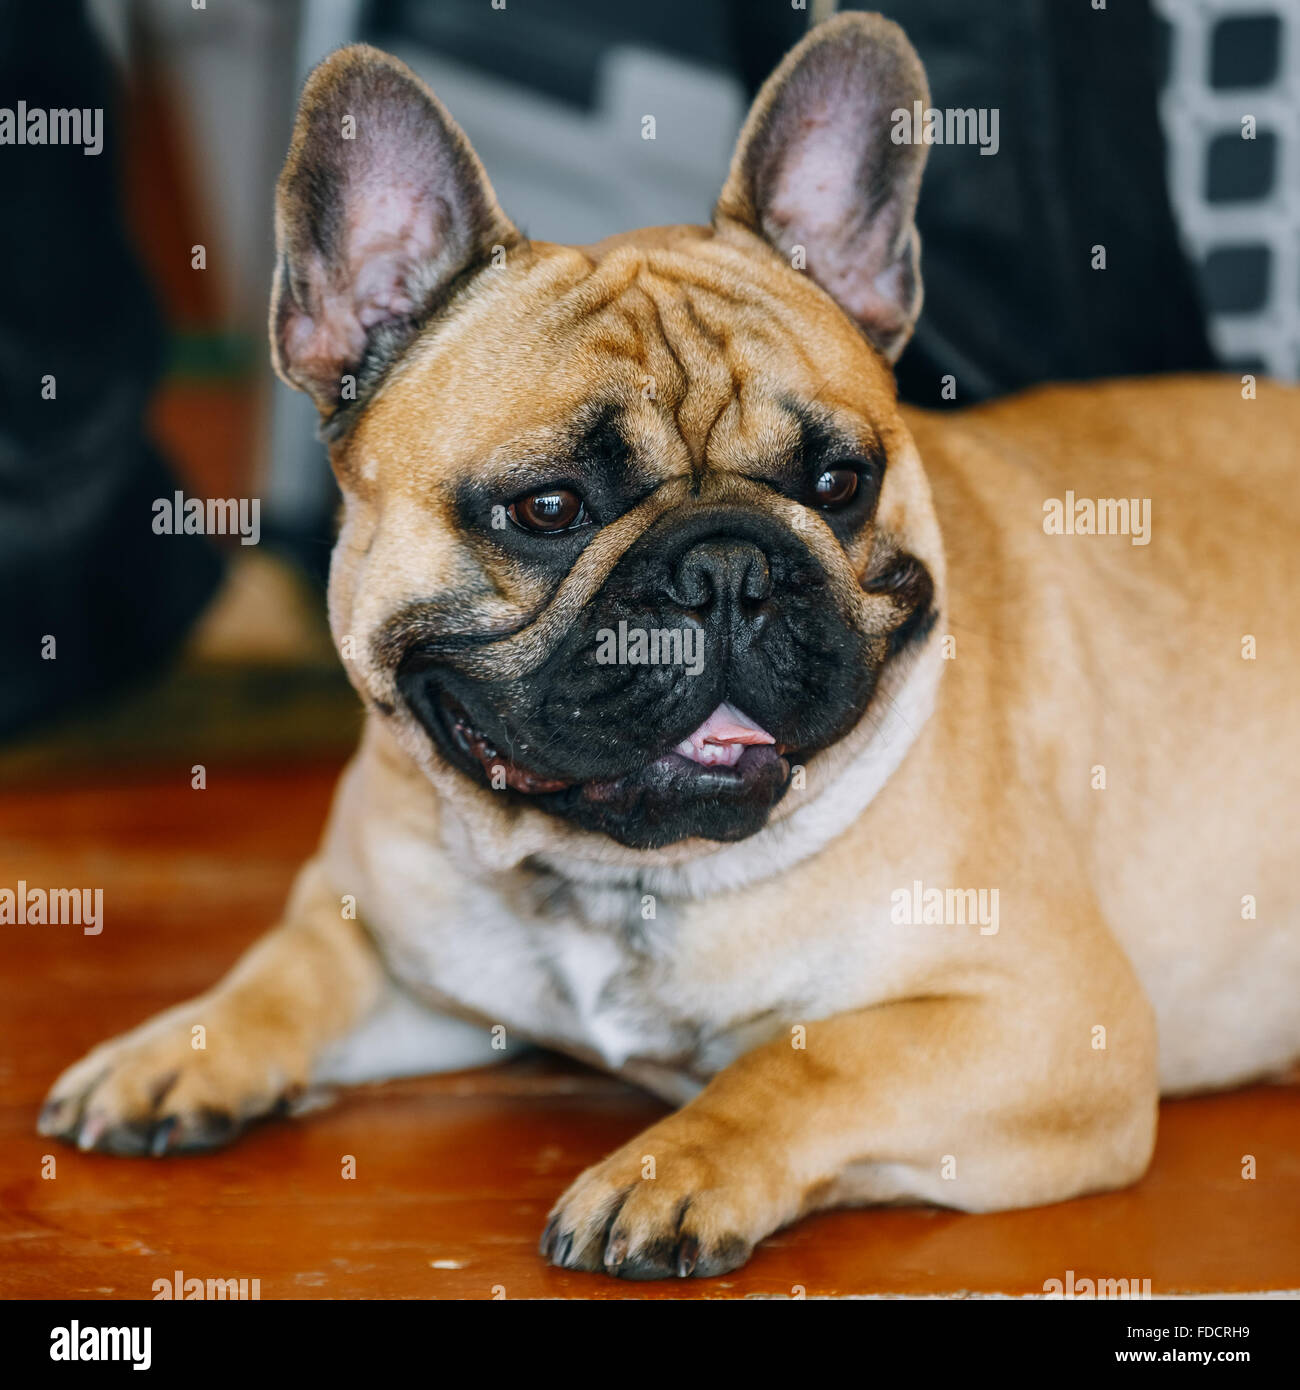 Funny Dog French Bulldog on floor inddor. The French Bulldog is a small breed of domestic dog Stock Photo